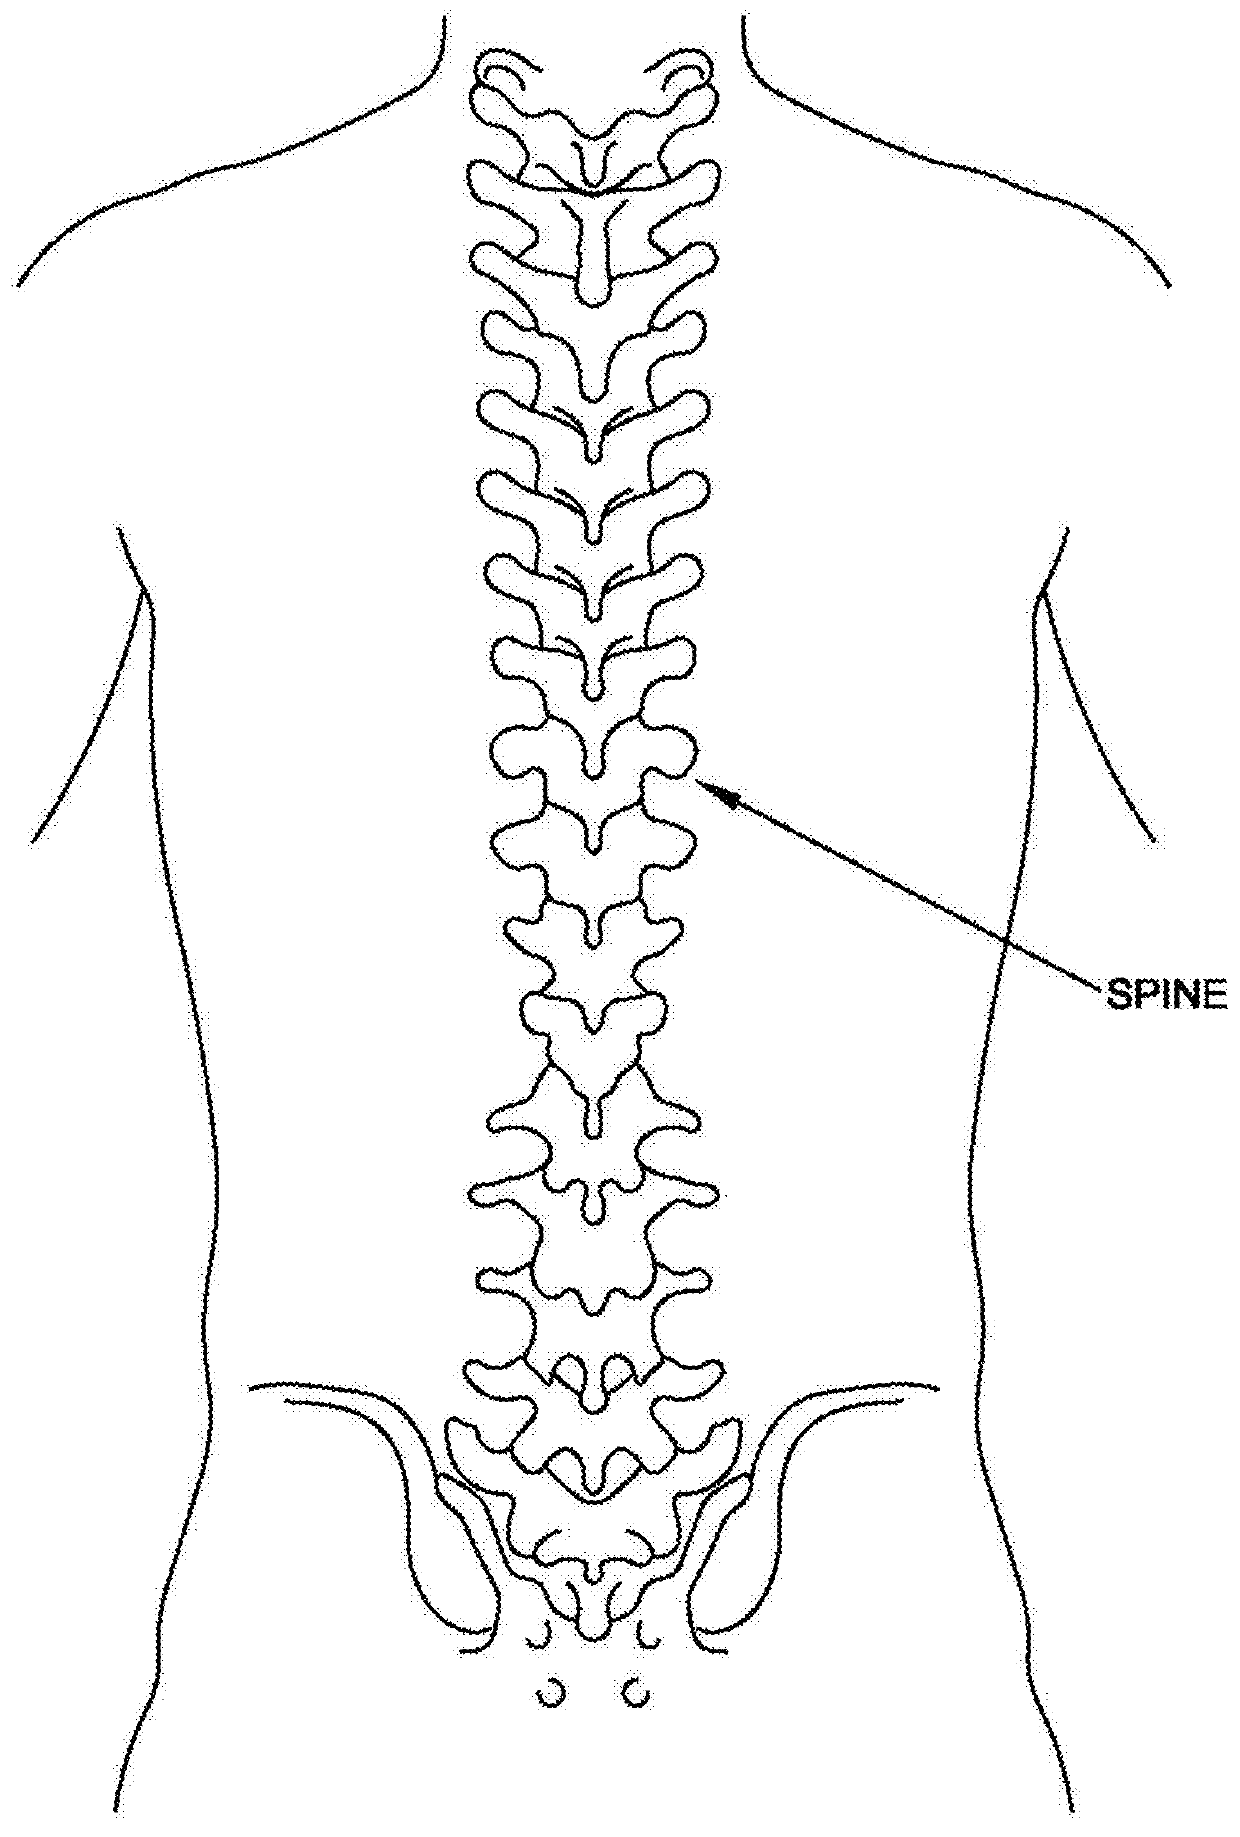 Sublaminar spinal fixation system and method of use